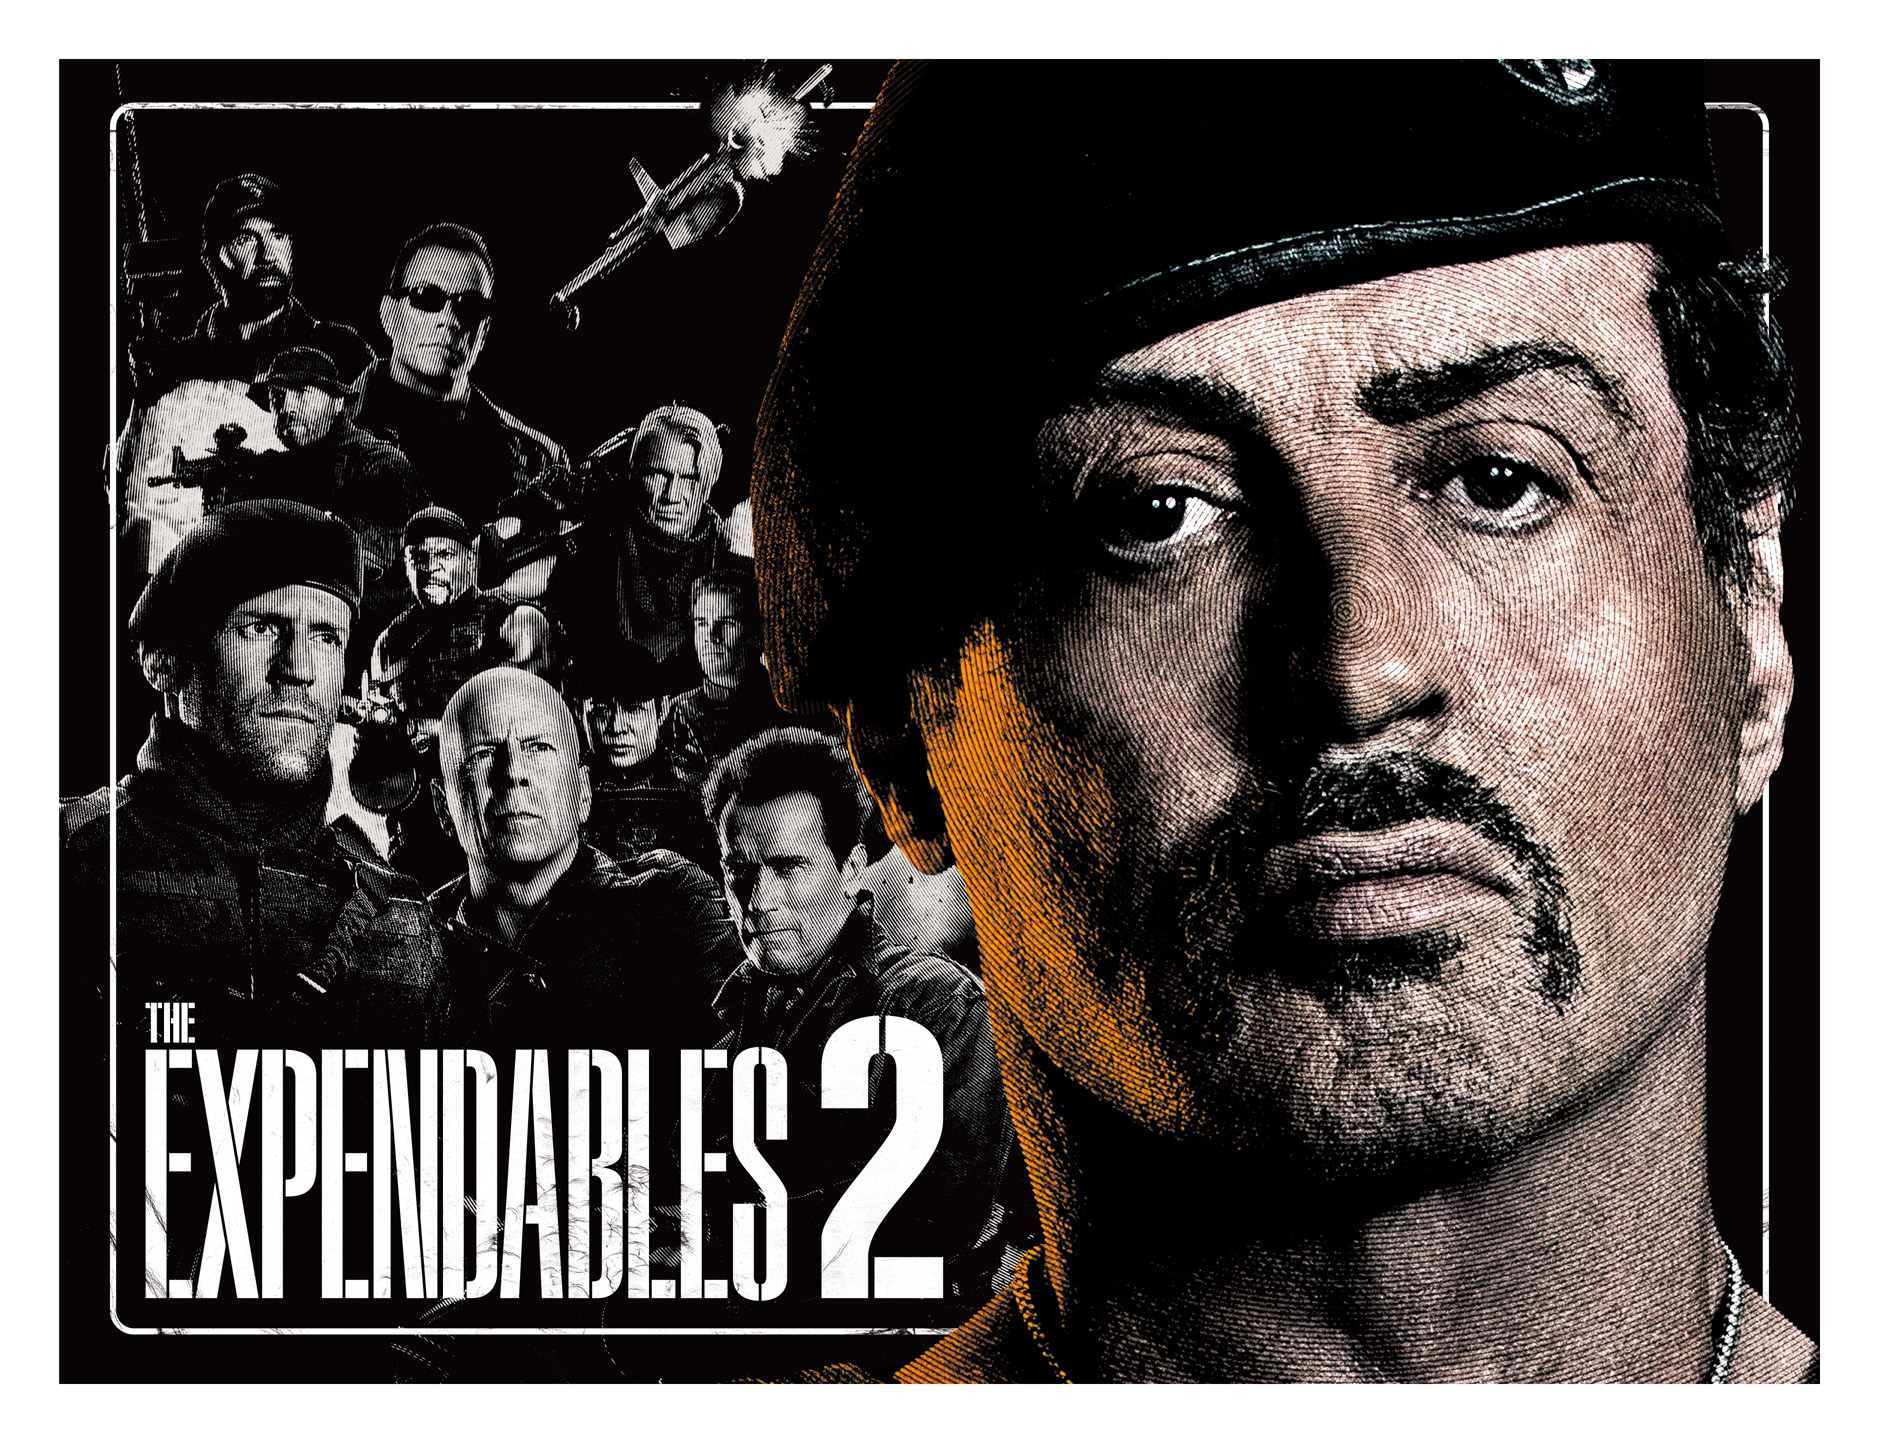 THE EXPENDABLE 2　劇場パンフレット 表紙デザイン